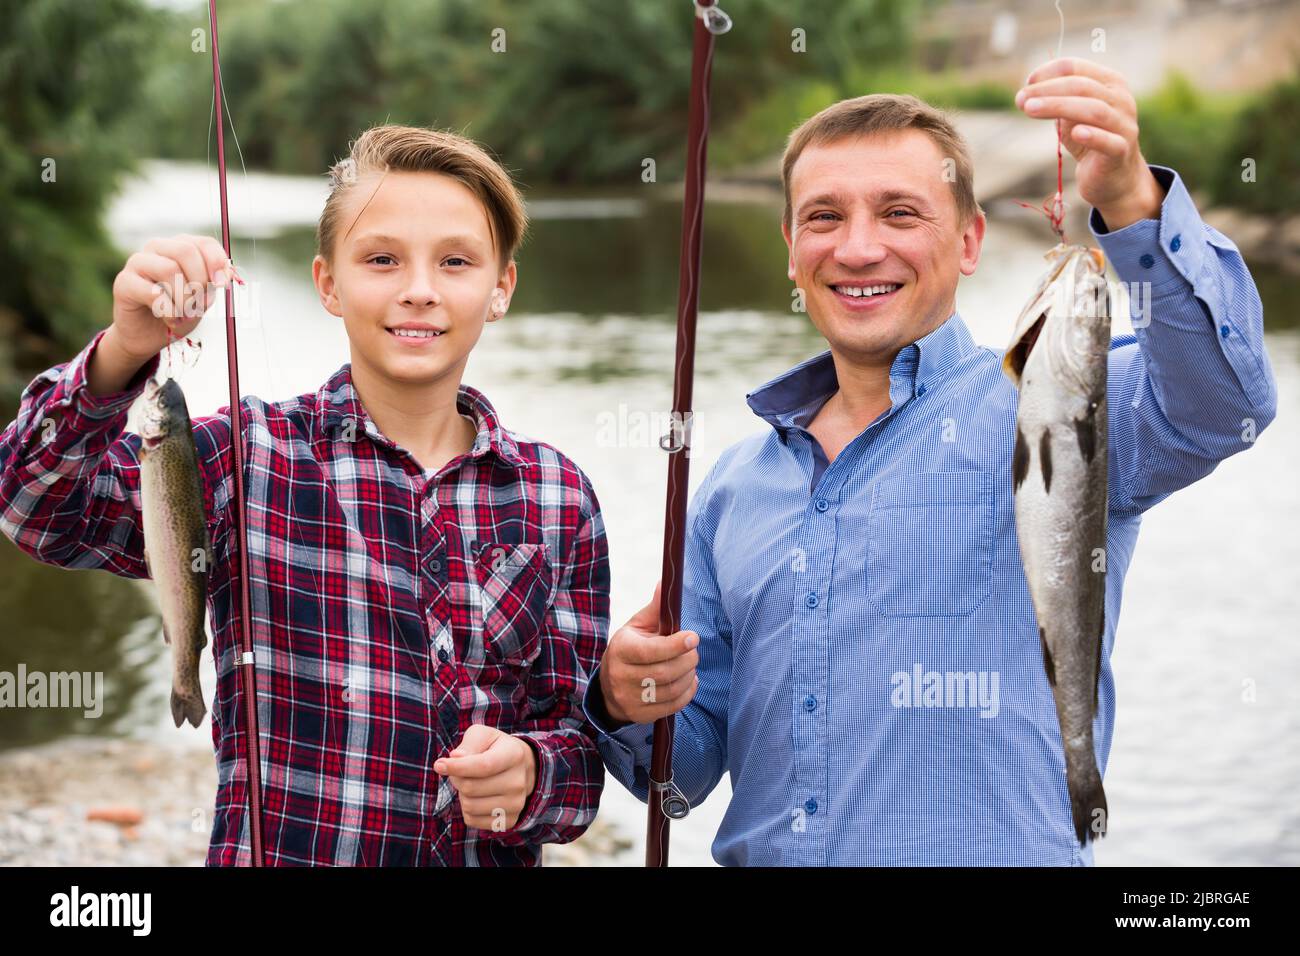 Young father with son looking at fish on hook Stock Photo